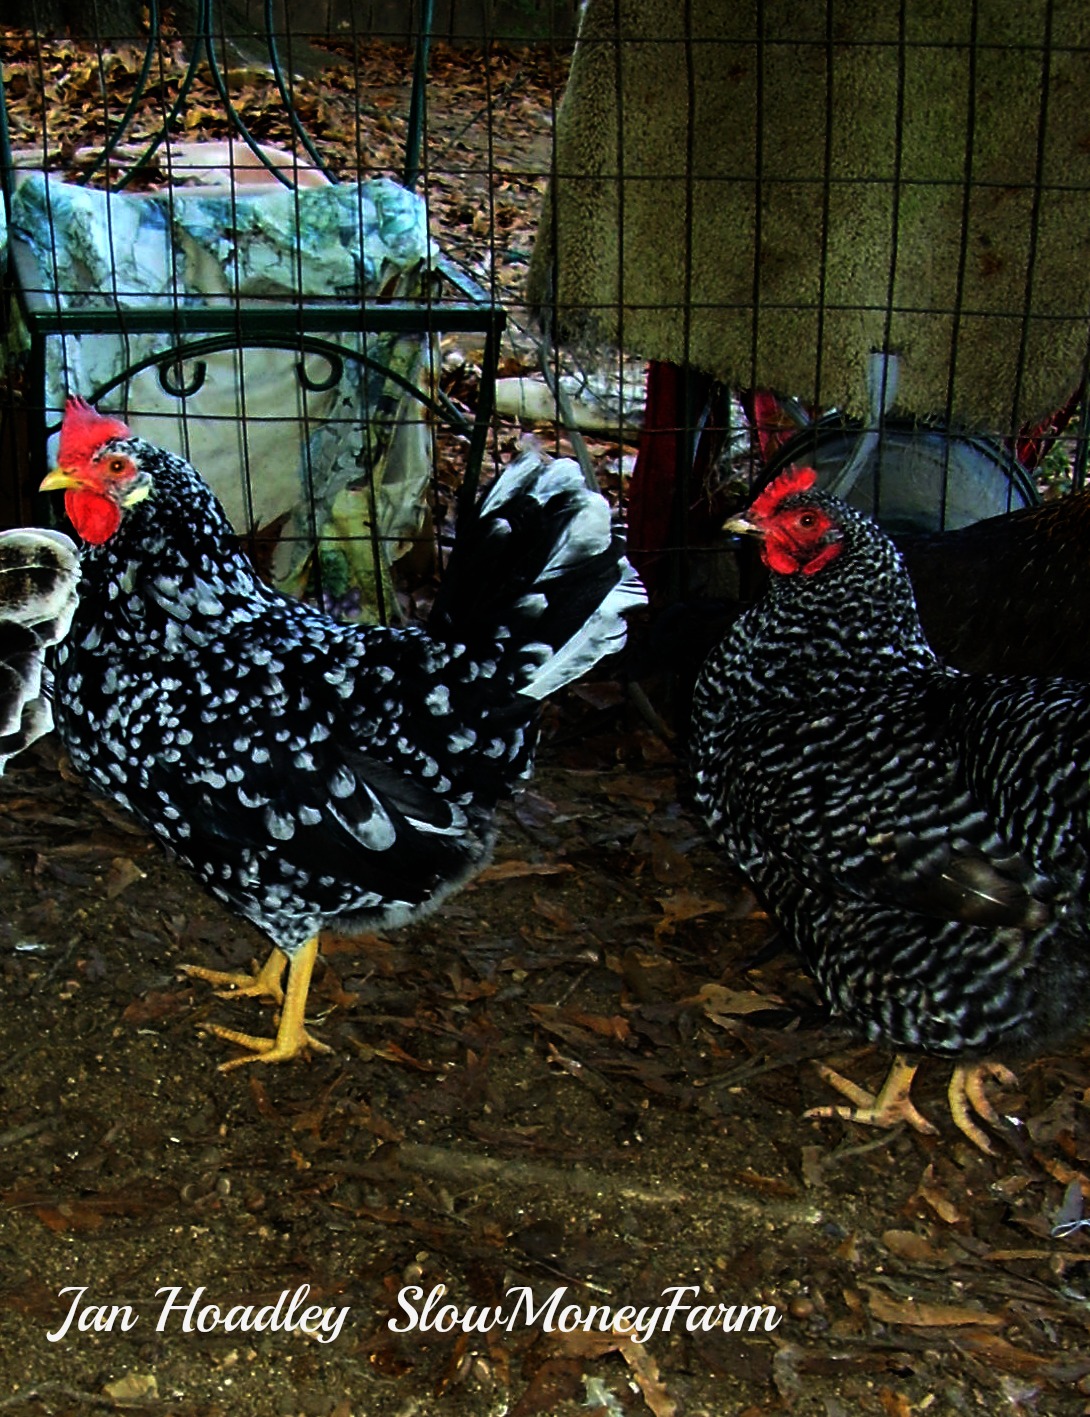 What Are Those Spotted Chickens? | Food, Farm, Life Choices